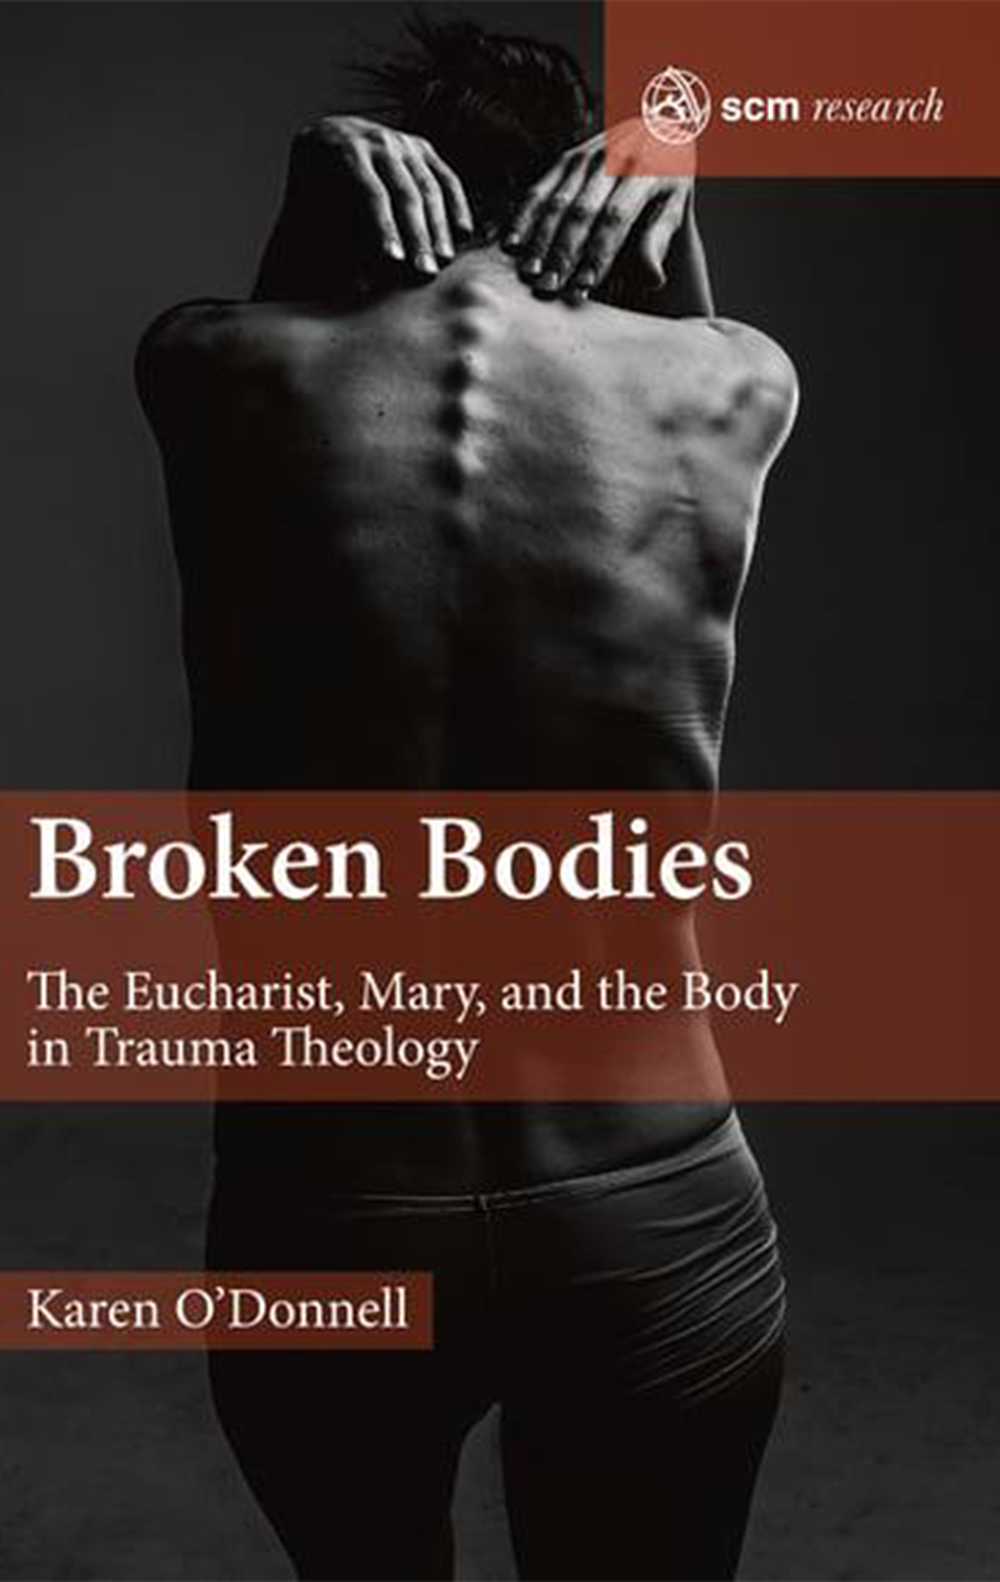 Broken Bodies: The Eucharist, Mary, and the Body in Trauma Theology